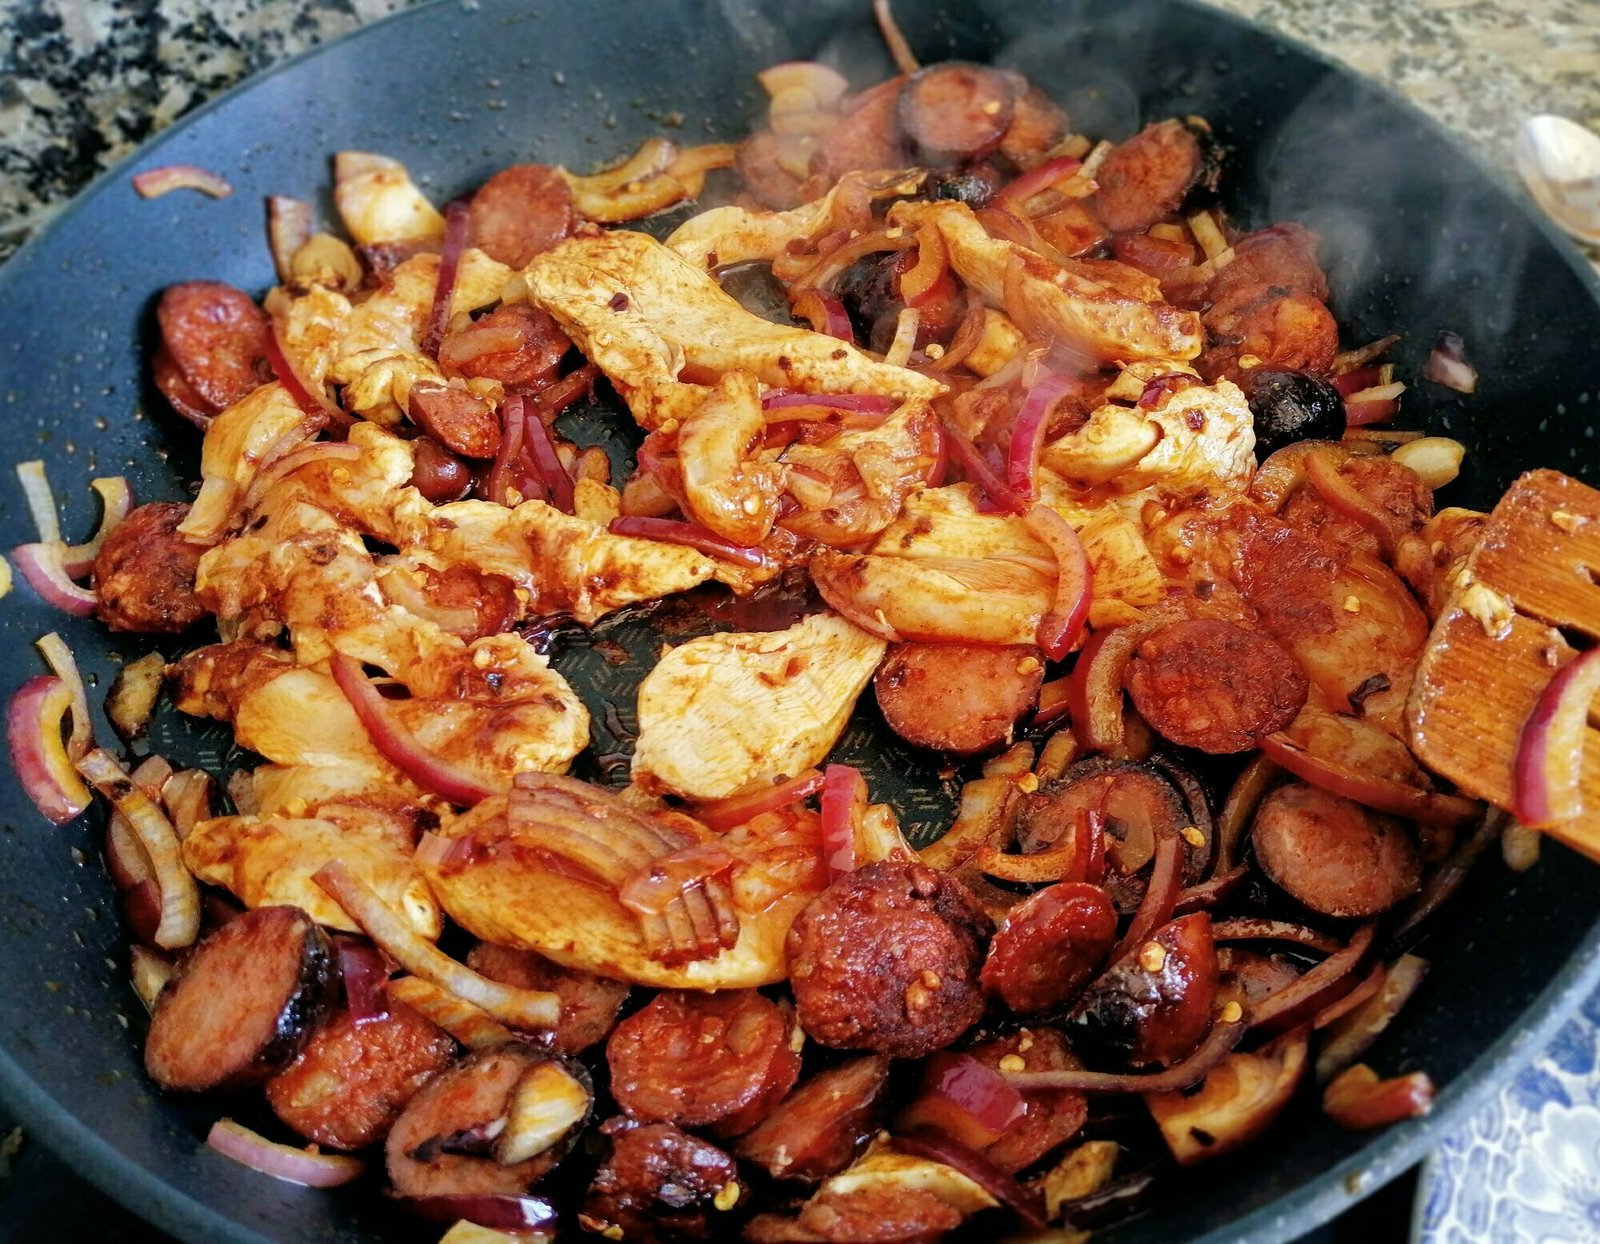 Chicken, chorizo, and onion cooks in a large frying pan